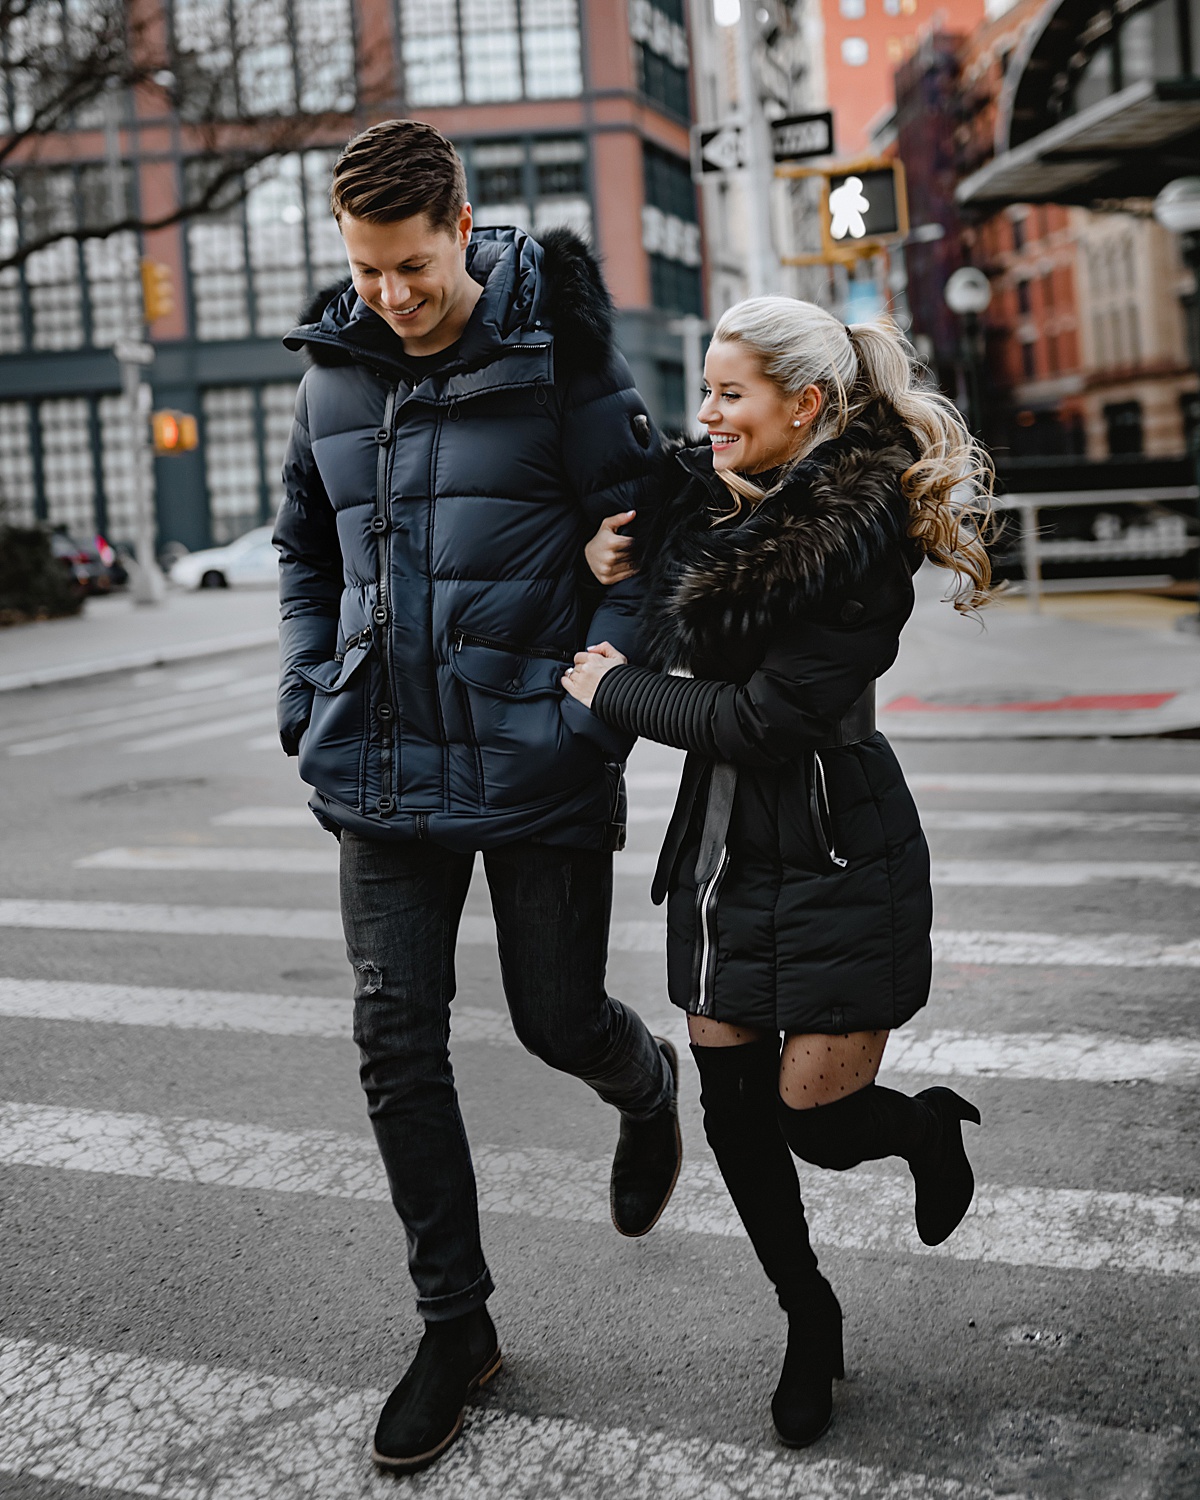 engagement pictures, engagement shoot, engaged 2020, engagement photos, olivia rink engagement, olivia rink engagement pictures, engagement outfit ideas, rudsak coats